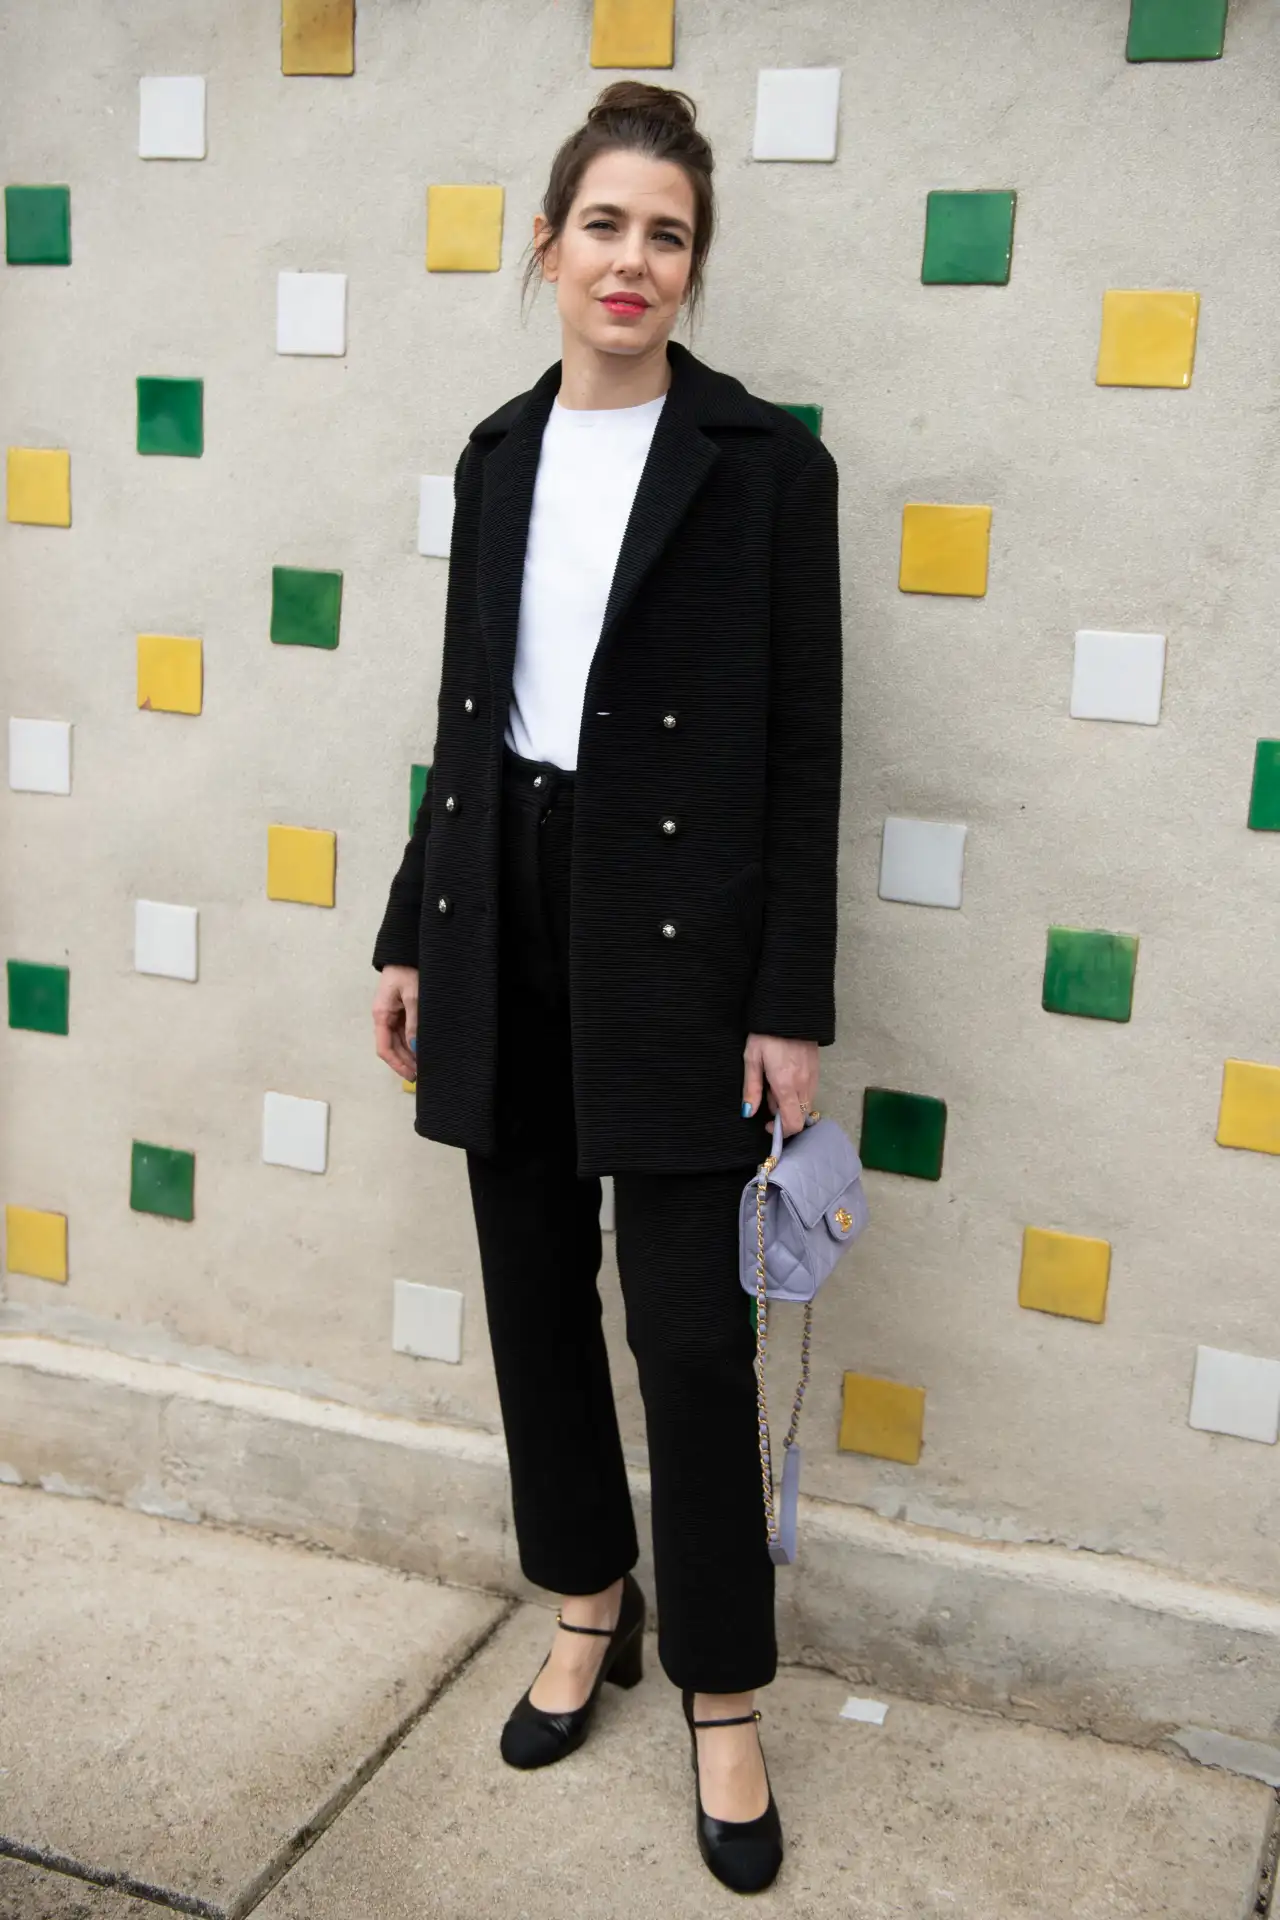 Charlotte Casiraghi attending the Chanel Cruise 2024-2025 show in Marseille, France. Photo by Aurore